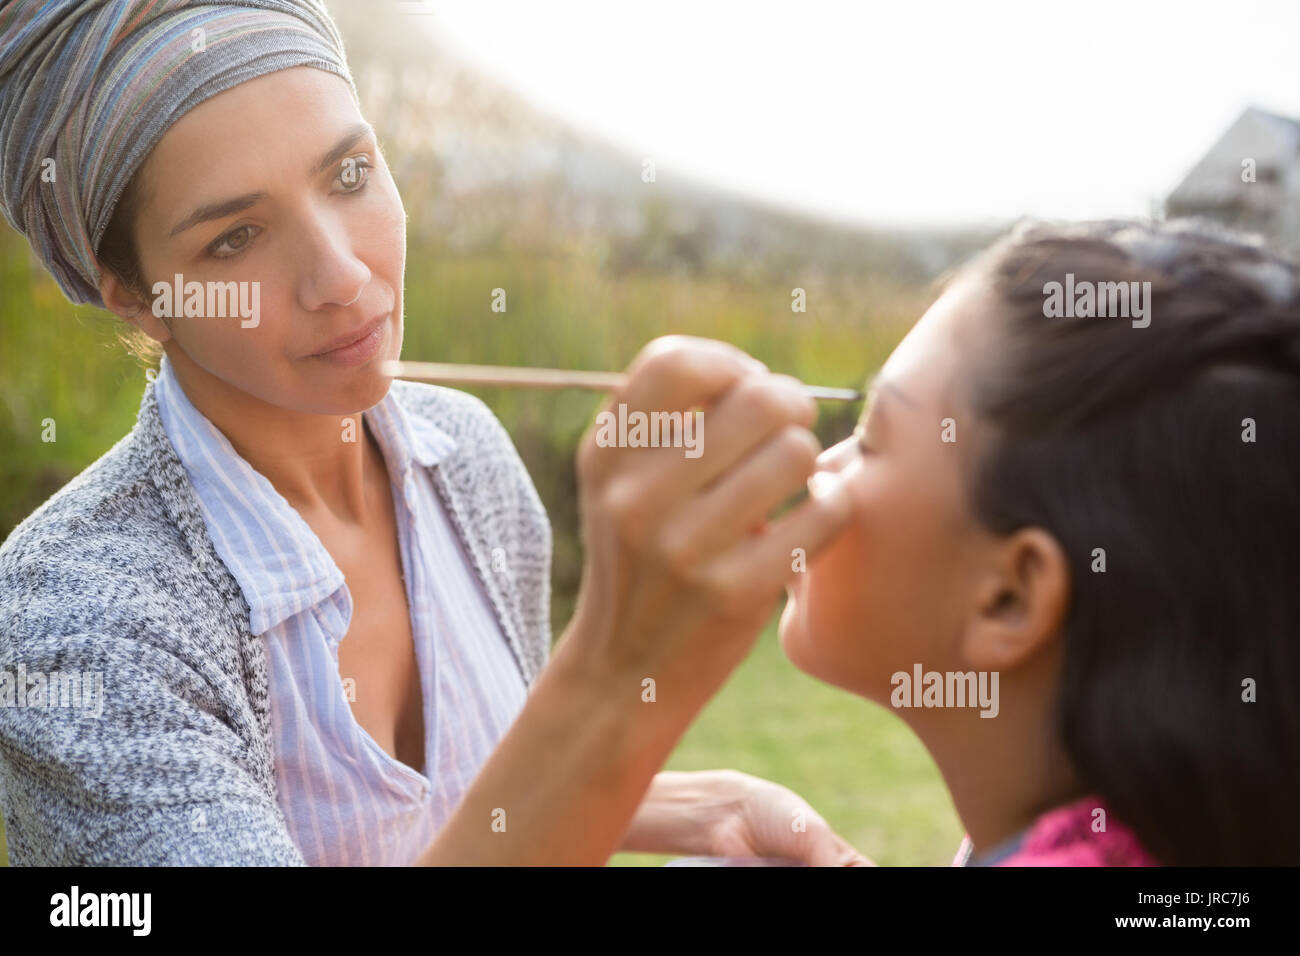 Ypung woman applying face paint on girl face during birthday party Stock Photo